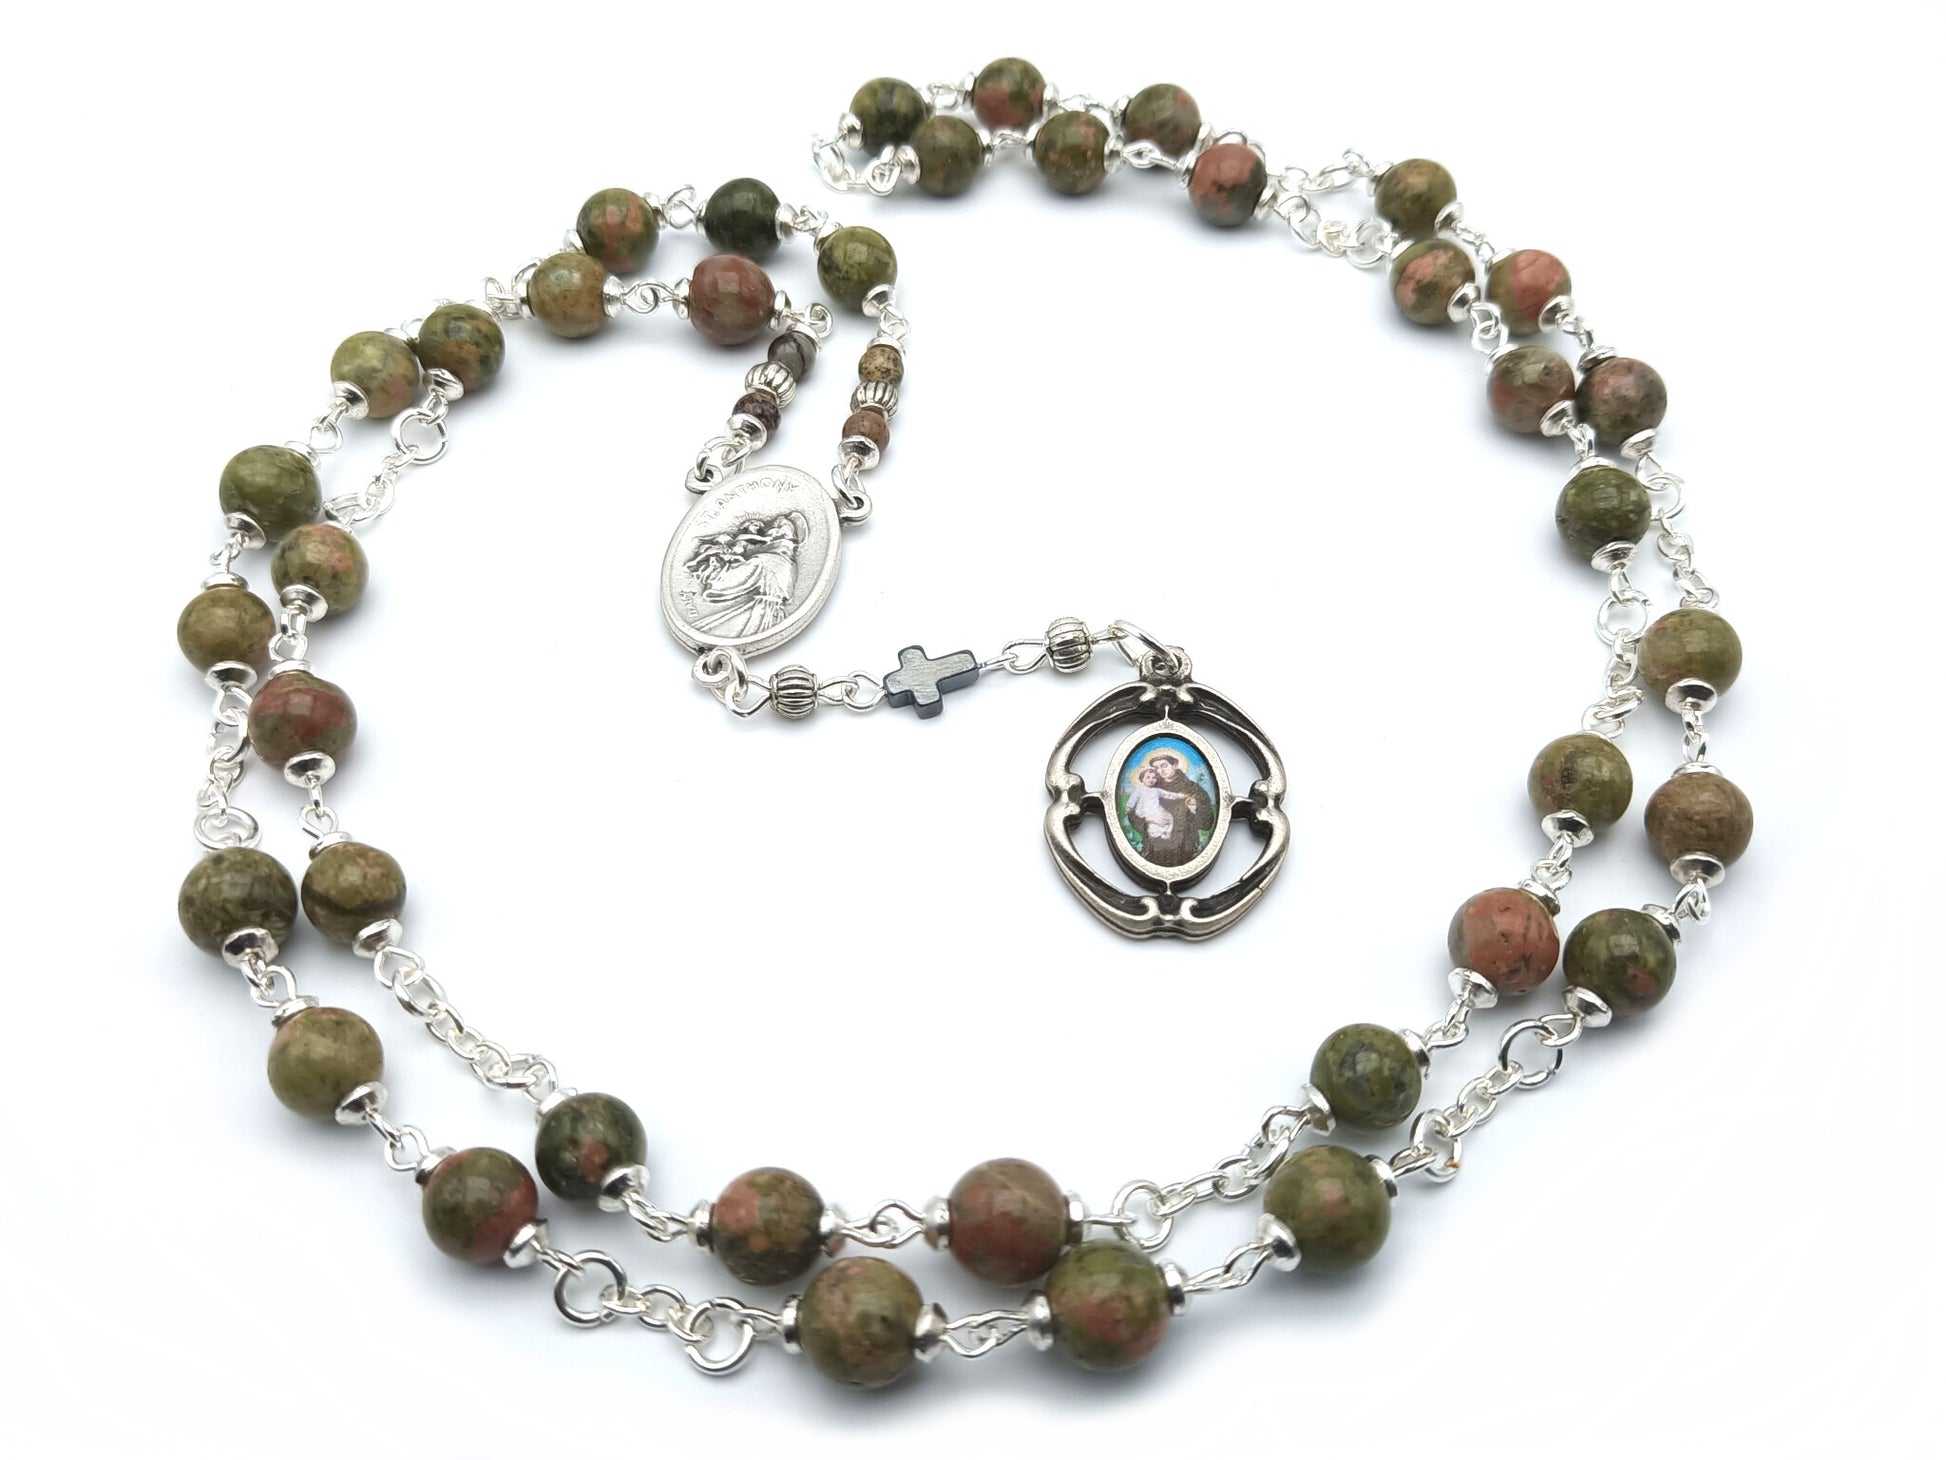 Saint Anthony unique rosary beads prayer chaplet with green jasper gemstone beads, silver end picture medal and centre medal.